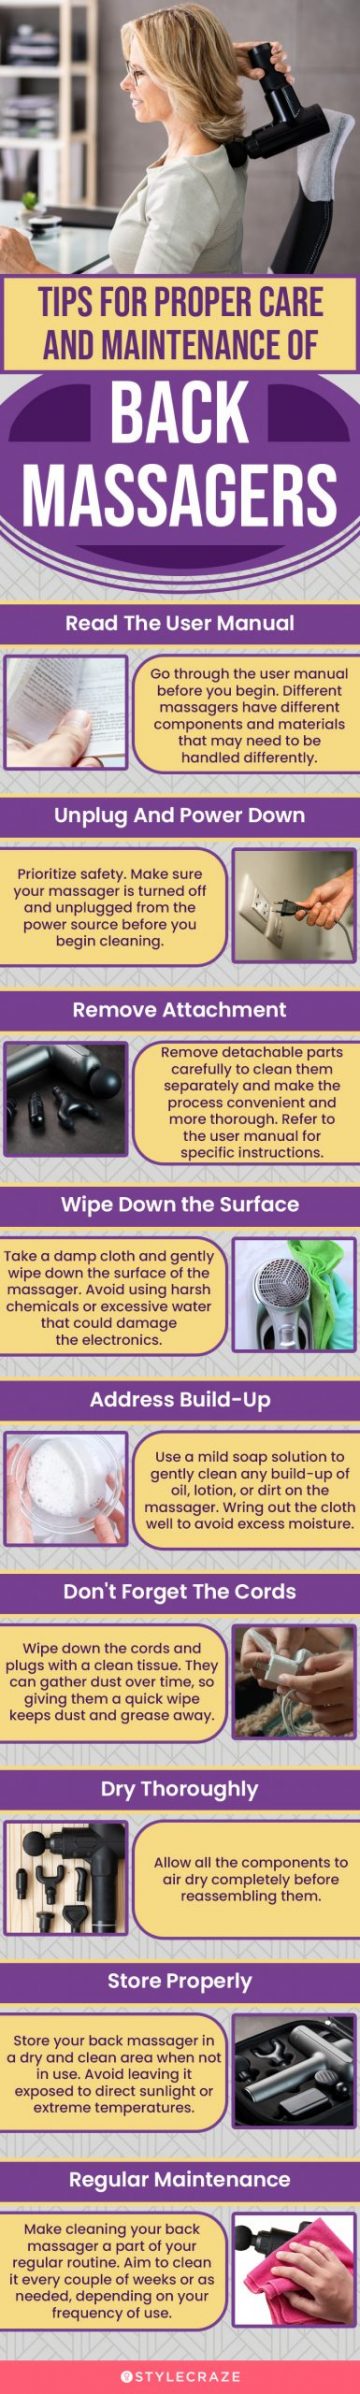 Tips For Proper Care And Maintenance Of Back Massagers (infographic)